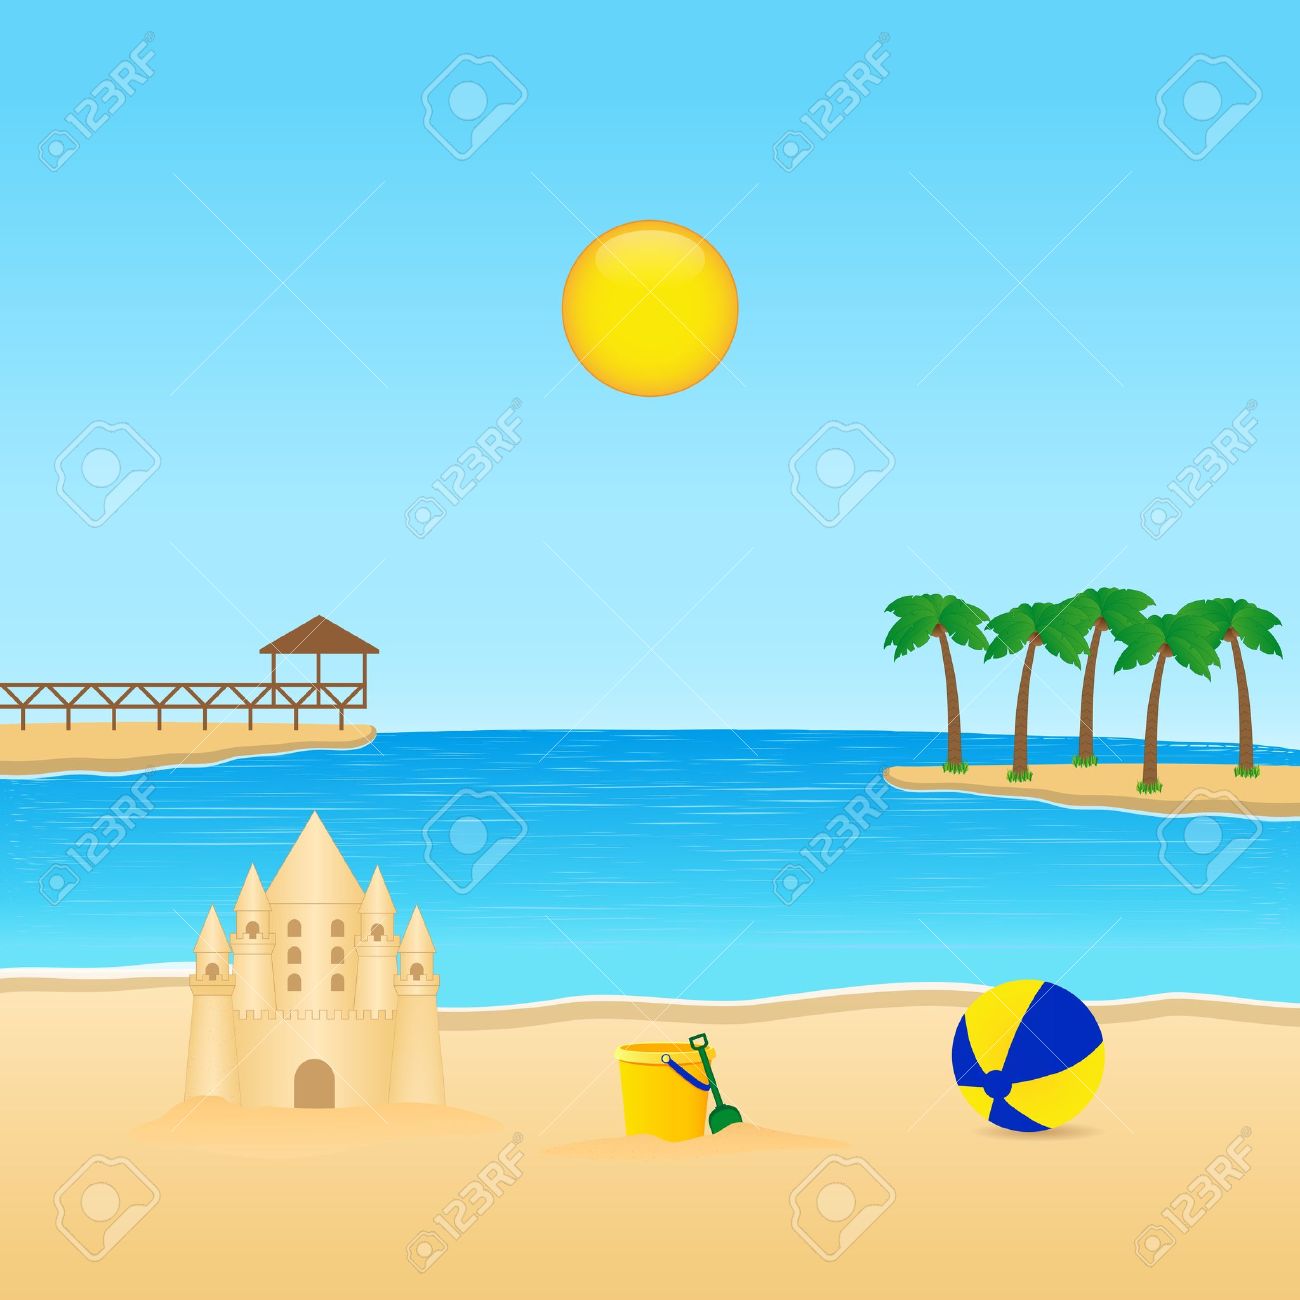 summer day clipart - photo #38